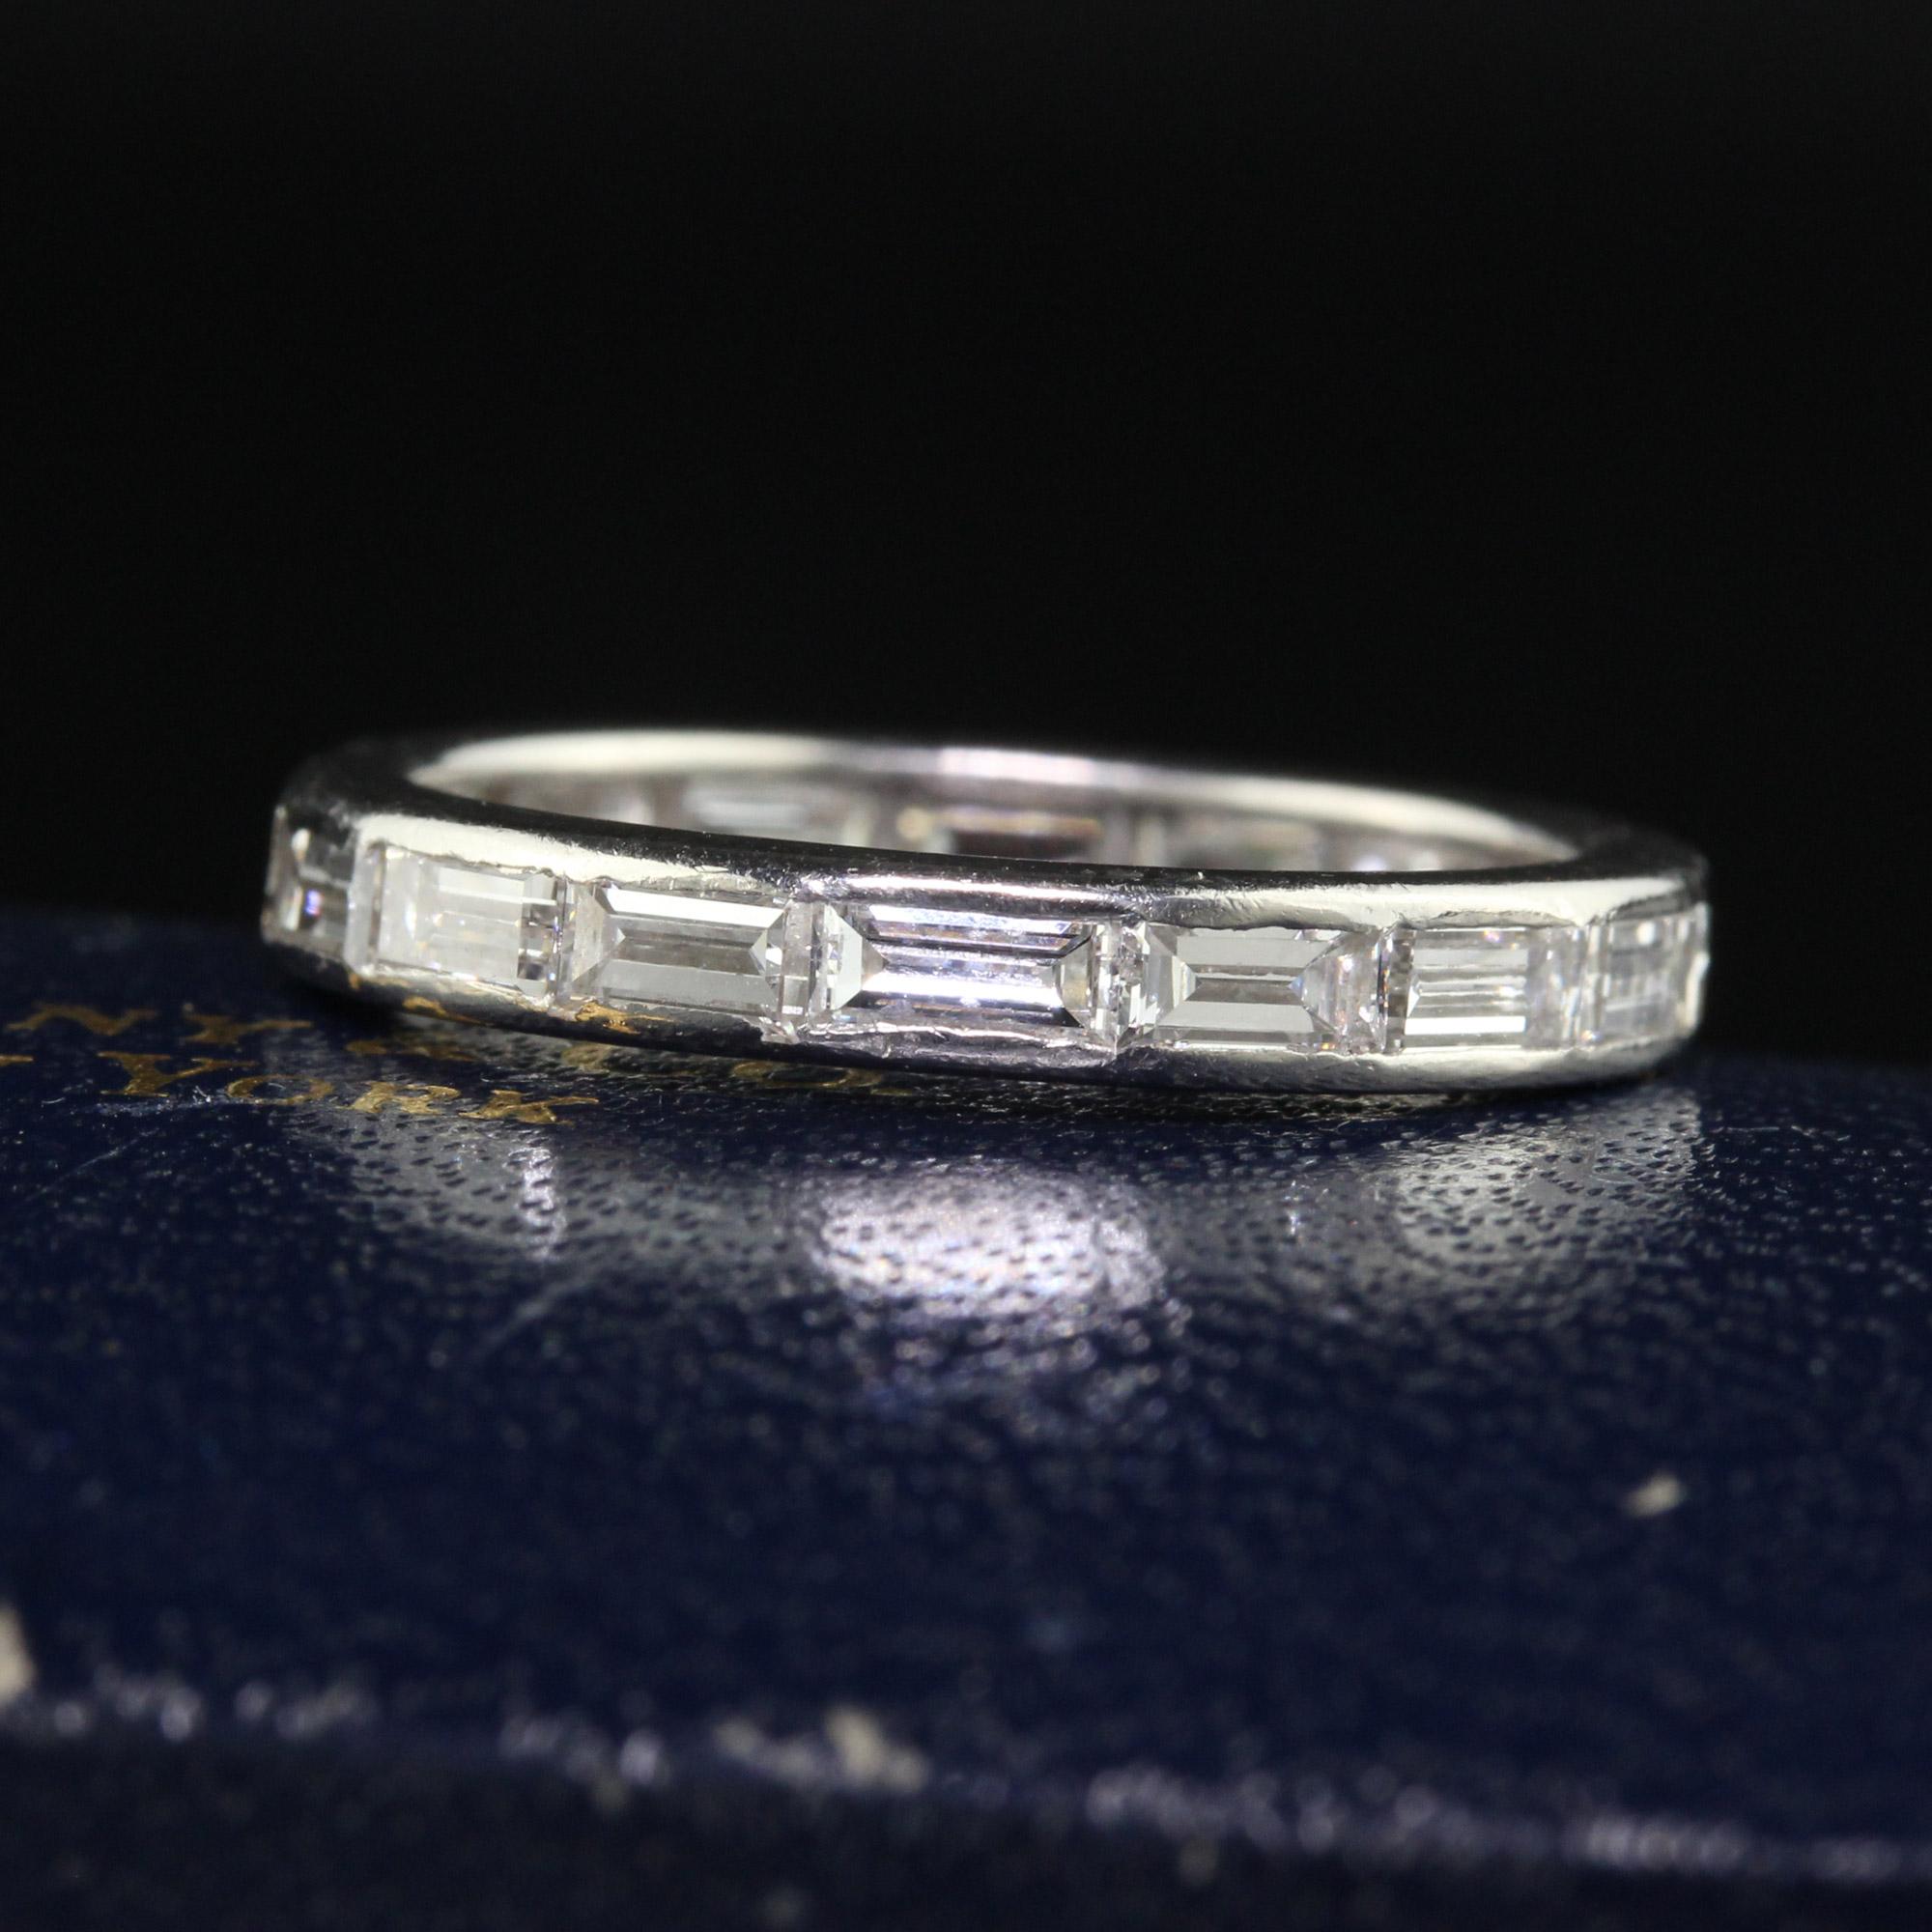 Beautiful Antique Art Deco Tiffany and Co Baguette Diamond Wedding Band - Size 6. This beautiful Tiffany and Co wedding band is crafted in platinum. The ring holds white and clean baguette diamonds that are set east to west around the entire ring.